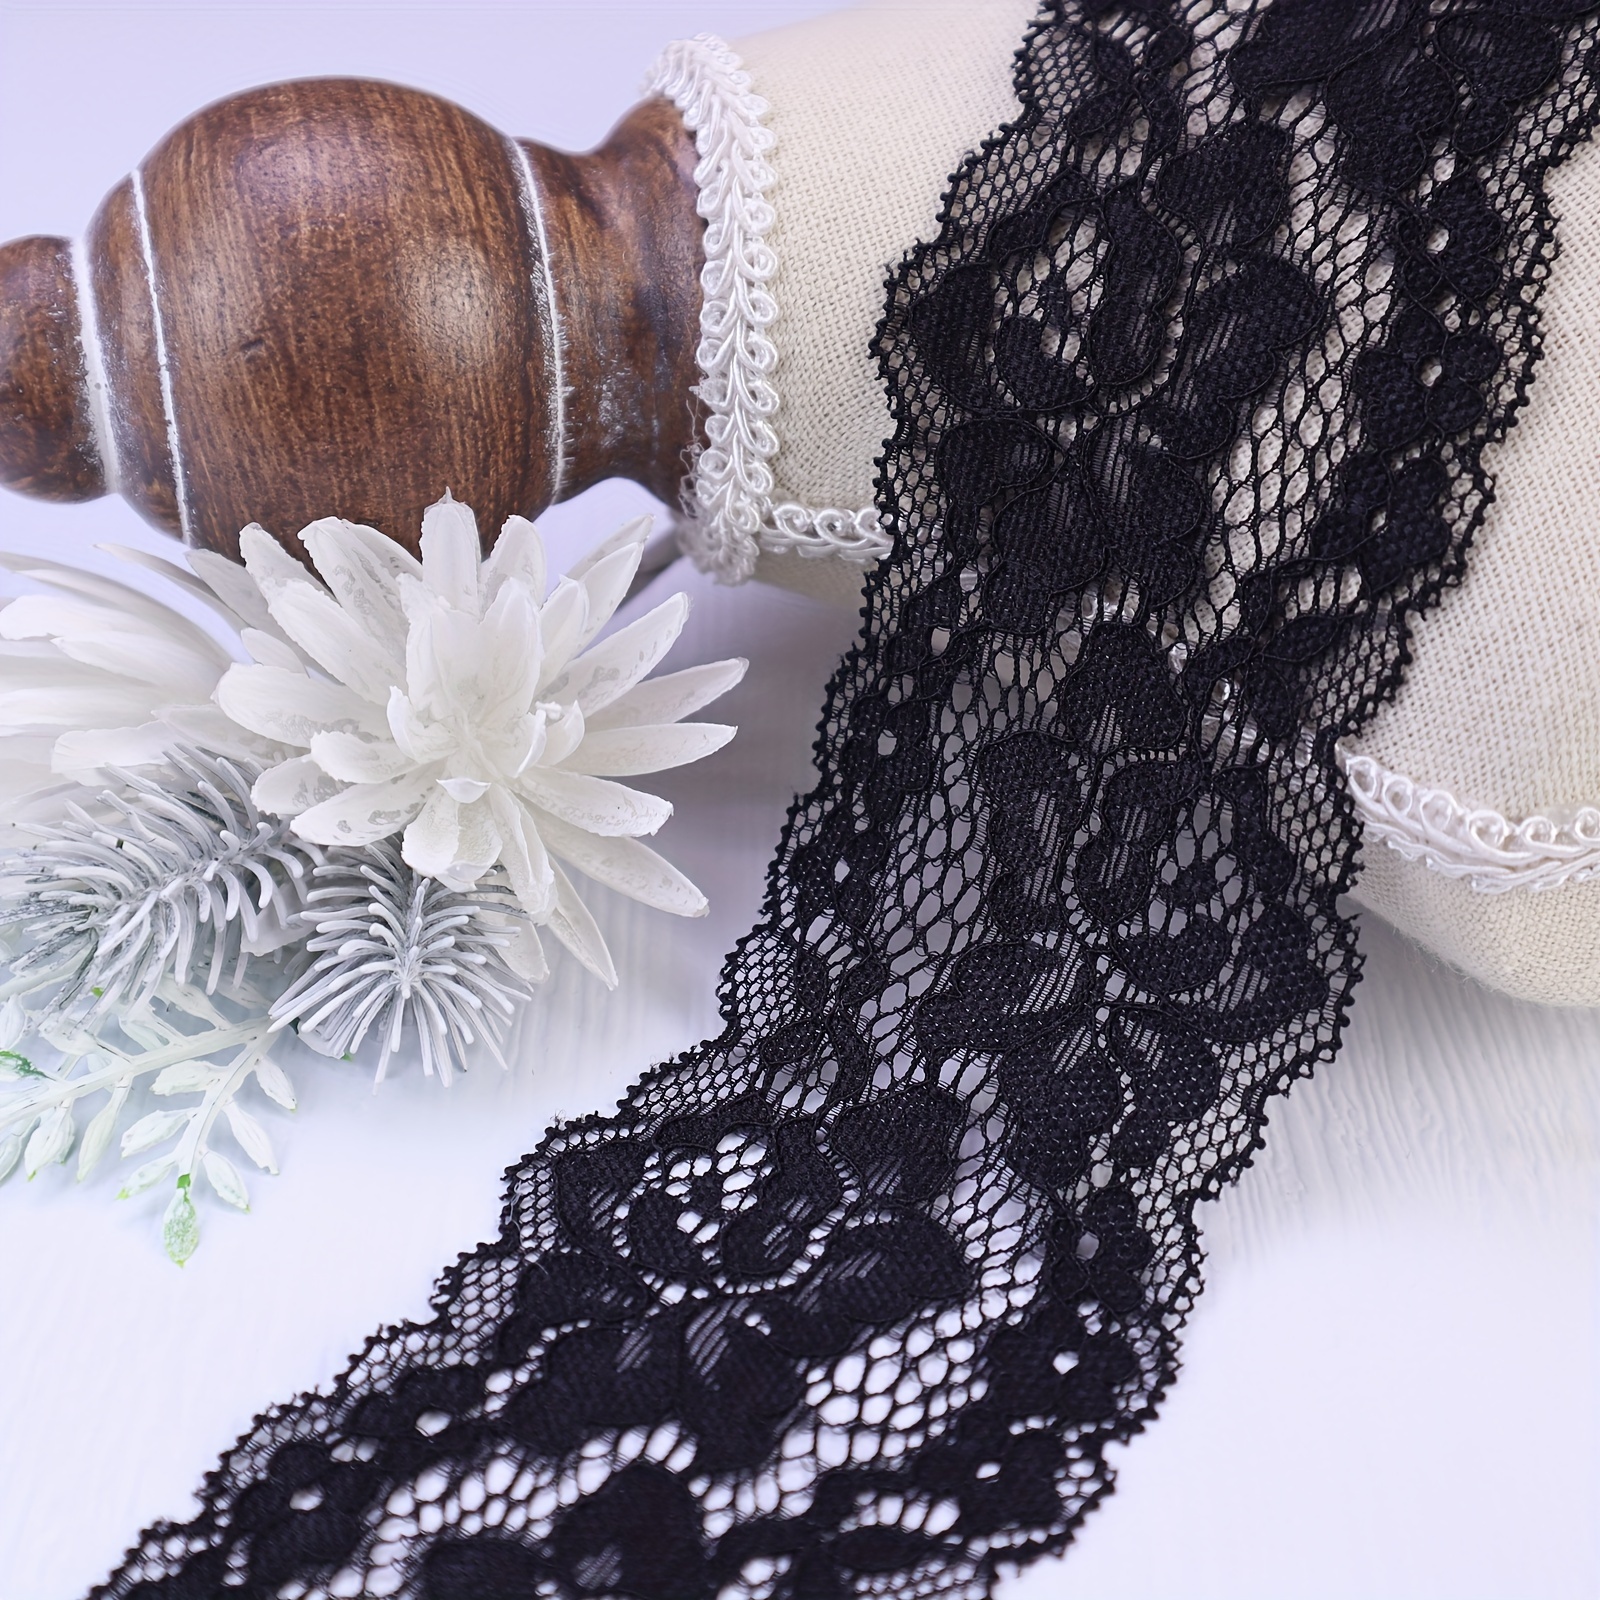 7 Wide Black Lace Fabric Sewing Lace Ribbon Trim Elastic Stretchy Lace for  Crafting 5 Yard 